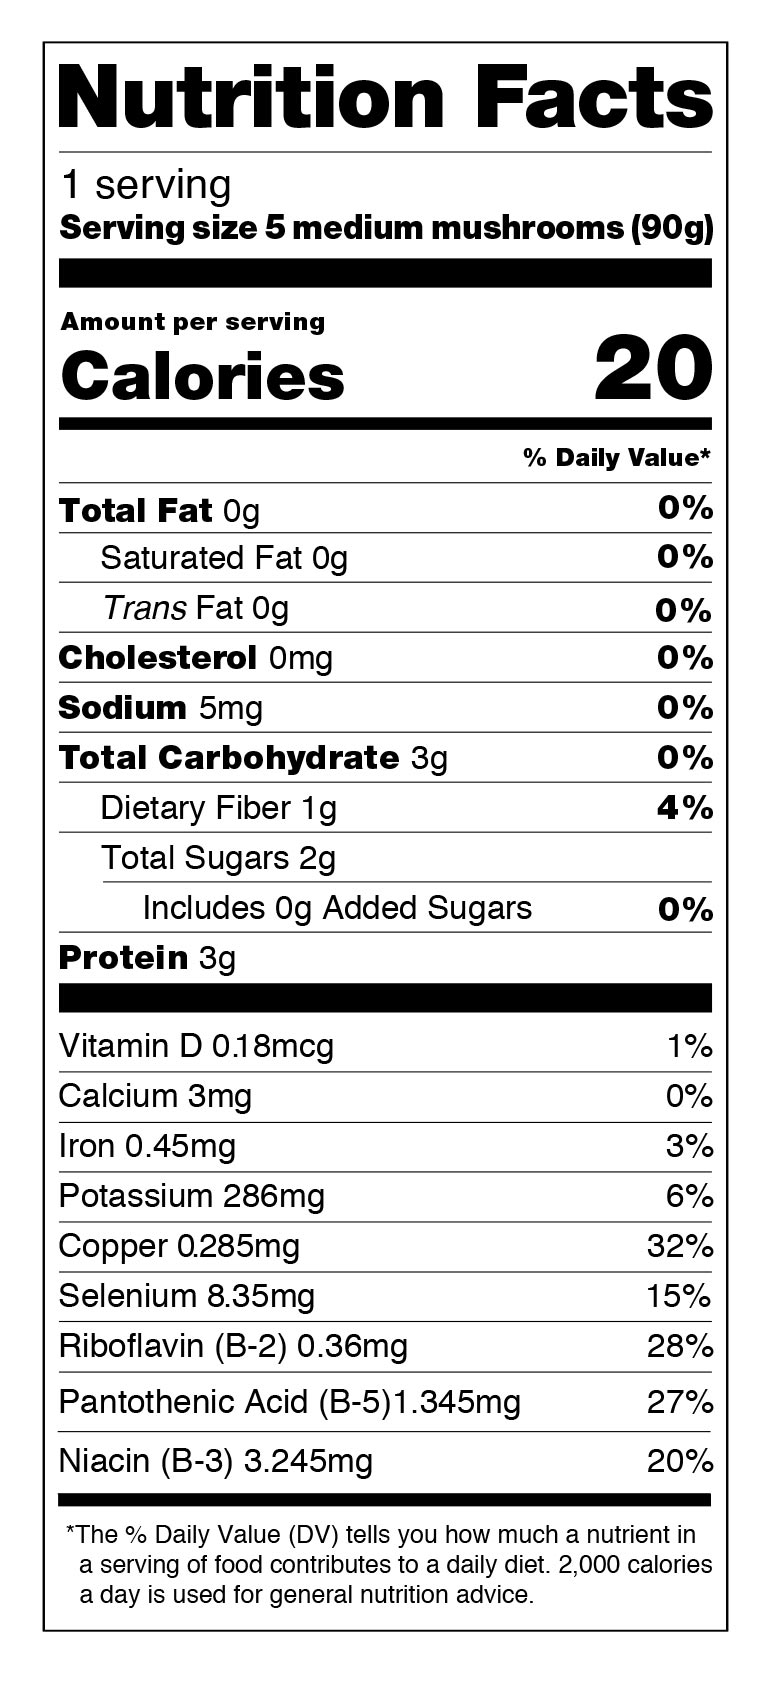 Nutrition facts label for white button mushrooms